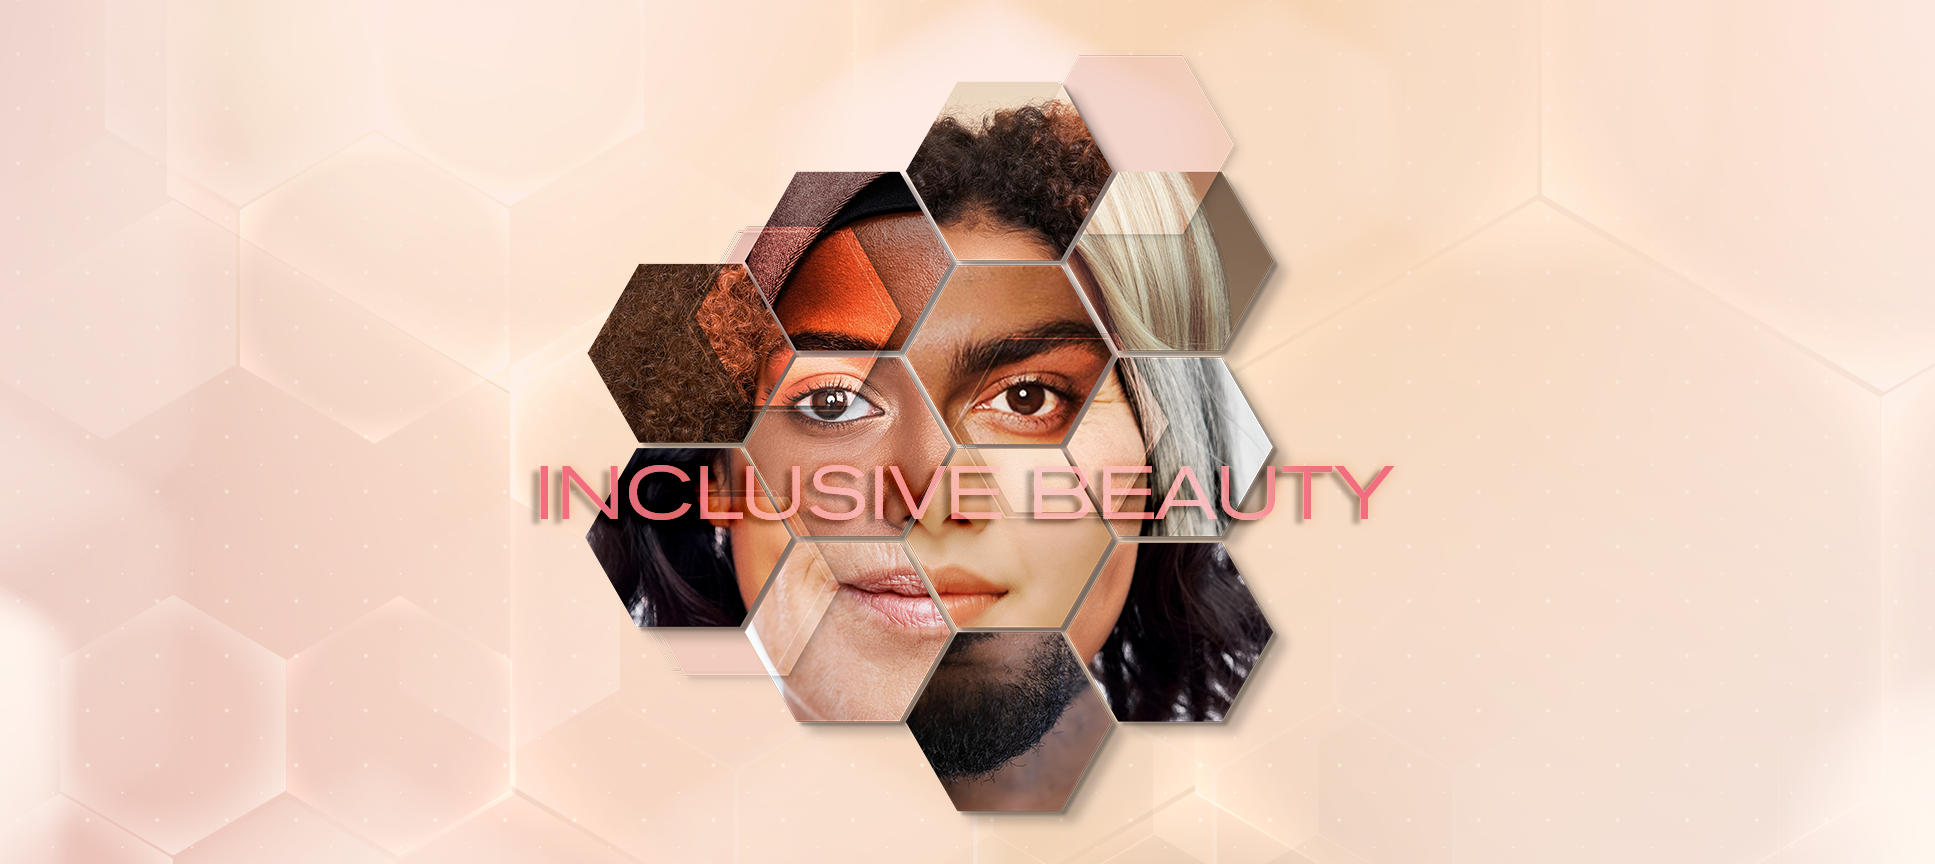 Inclusive Beauty: The Collection